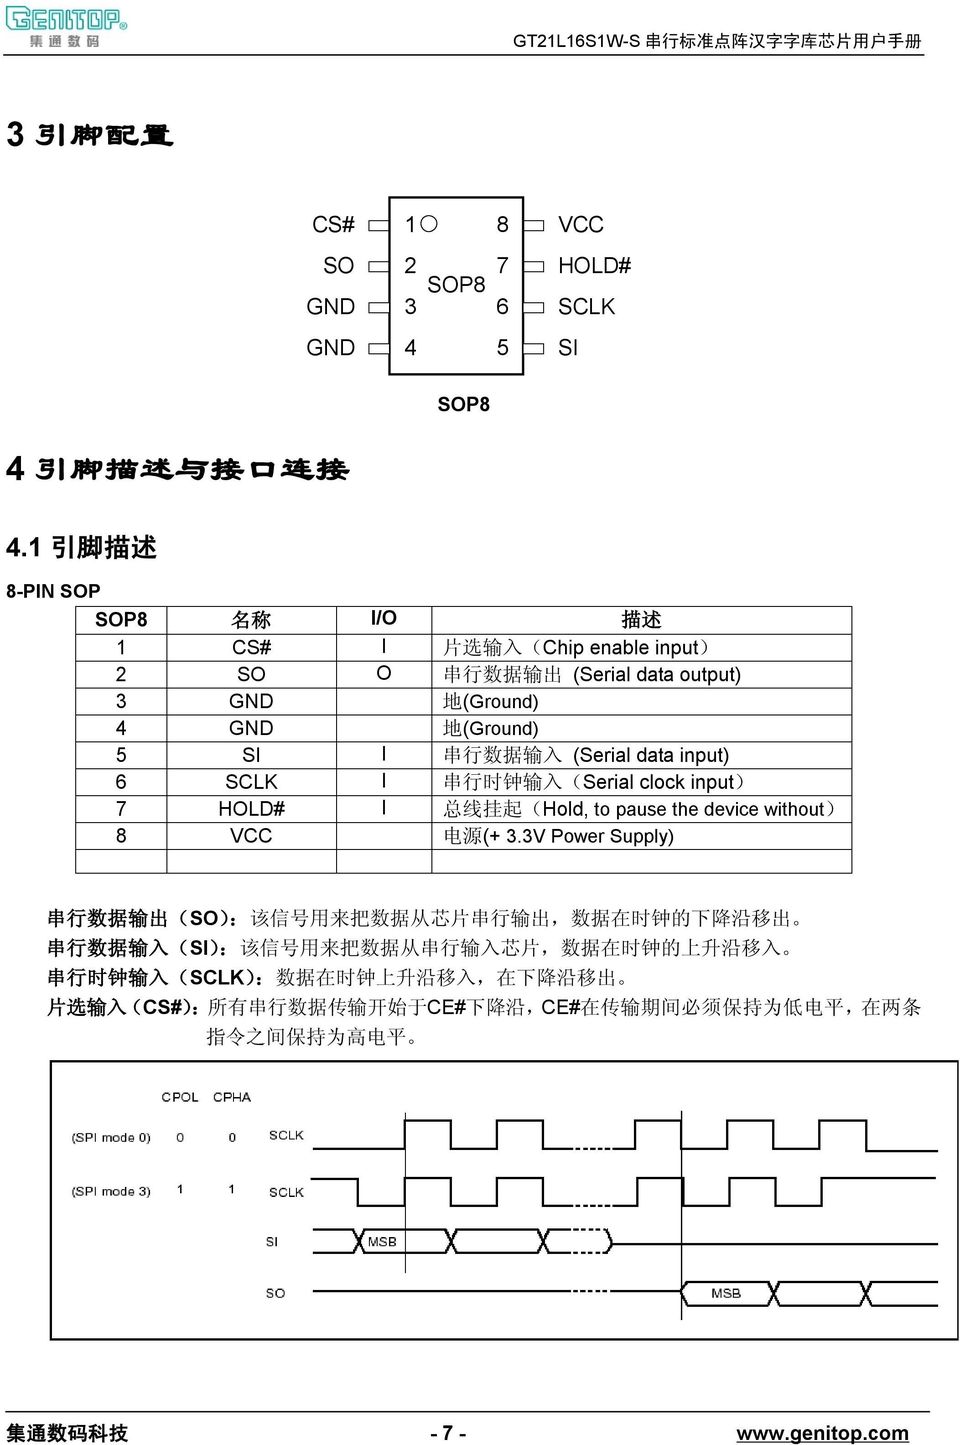 input) 6 SCLK I 串 行 时 钟 输 入 (Serial clock input) 7 HOLD# I 总 线 挂 起 (Hold, to pause the device without) 8 VCC 电 源 (+ 3.